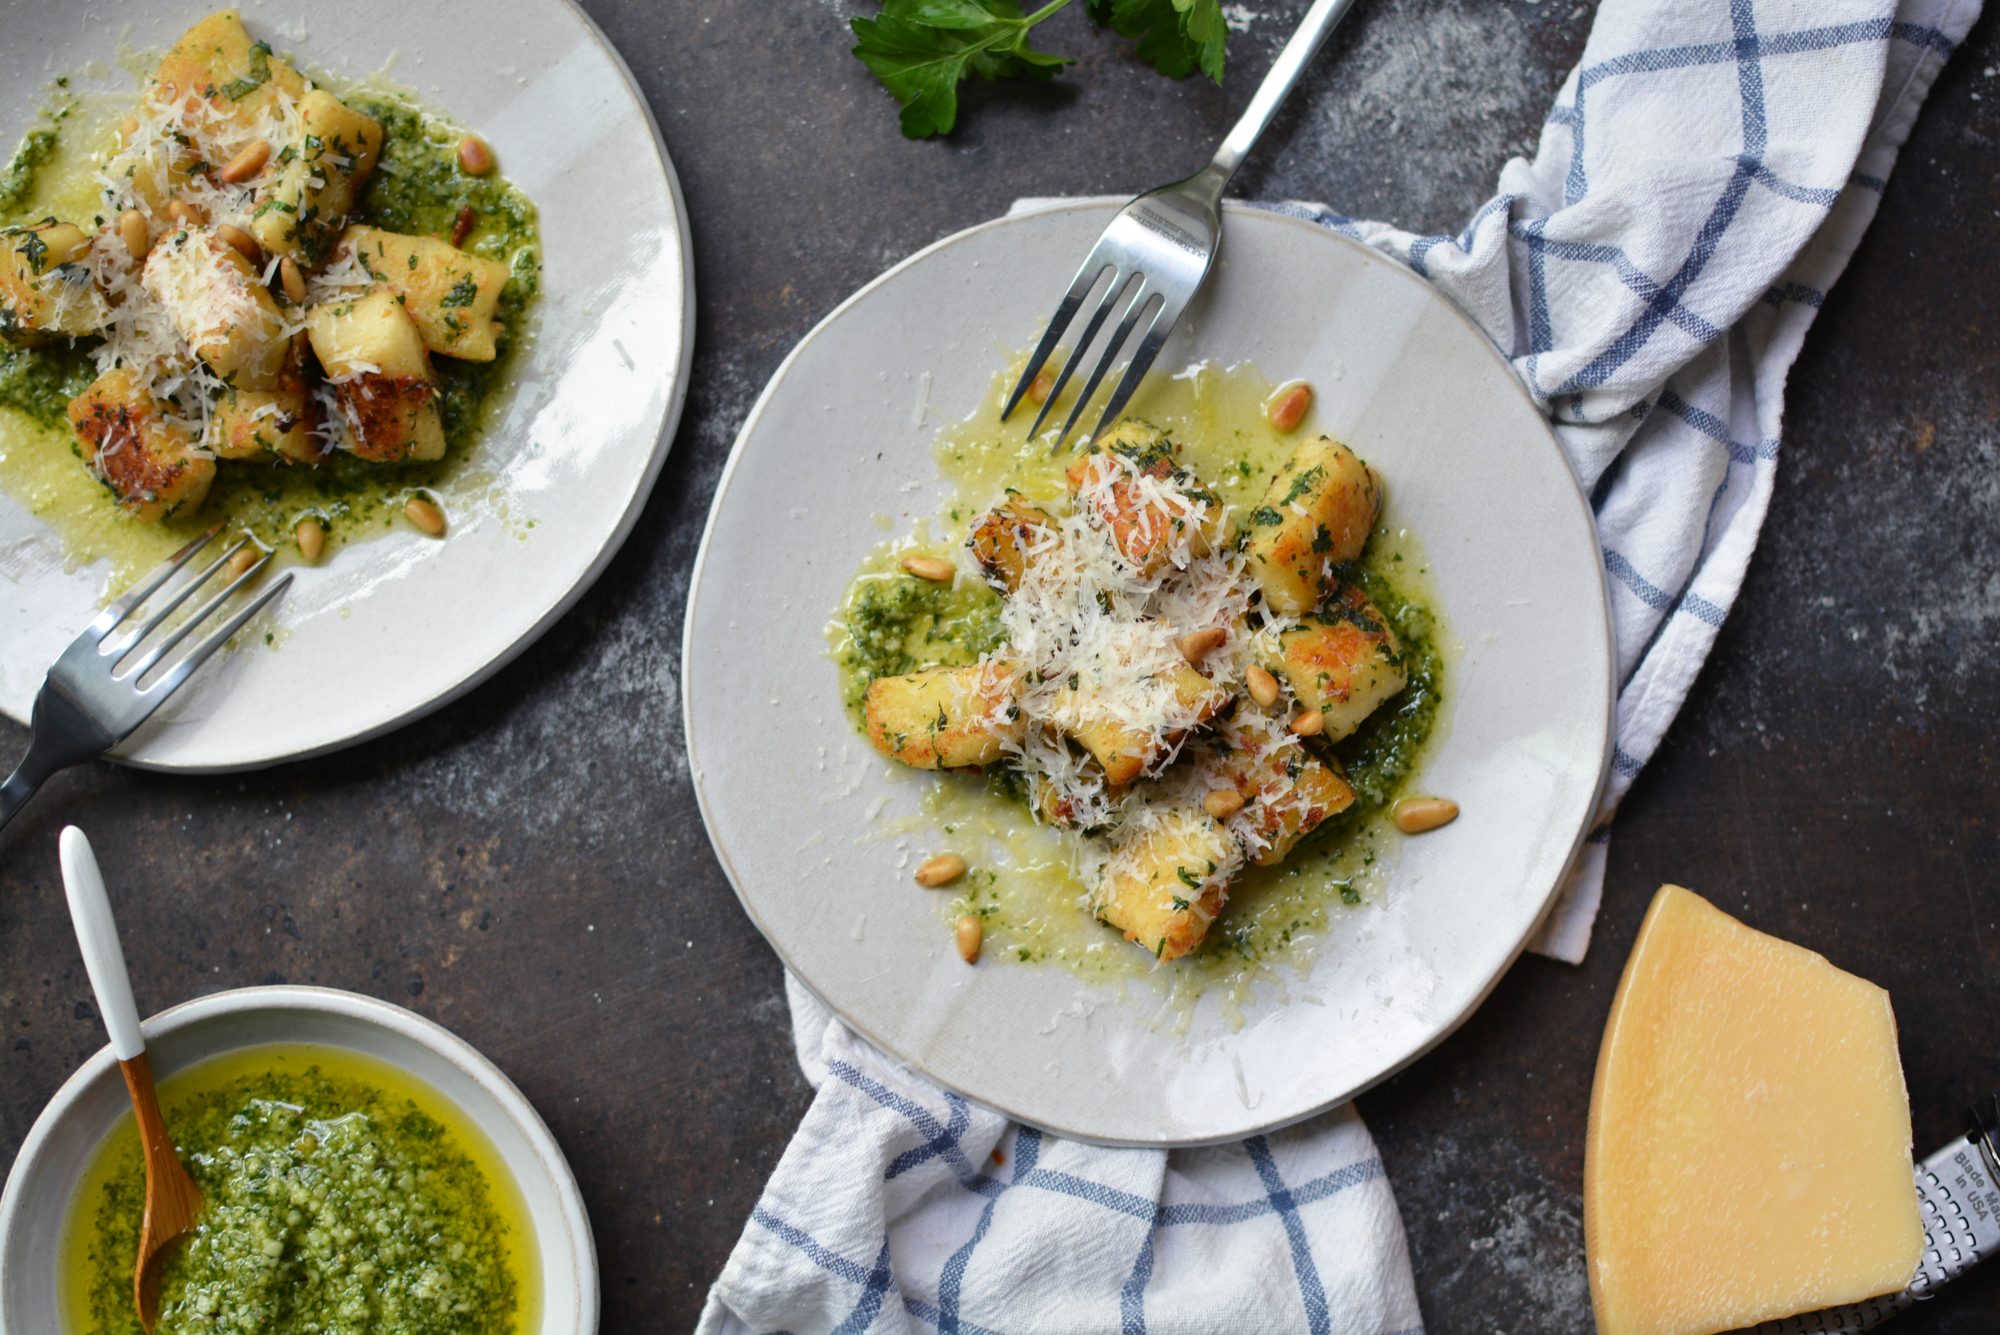 Fried Gnocchi with Garlic, Herbs, and Pesto